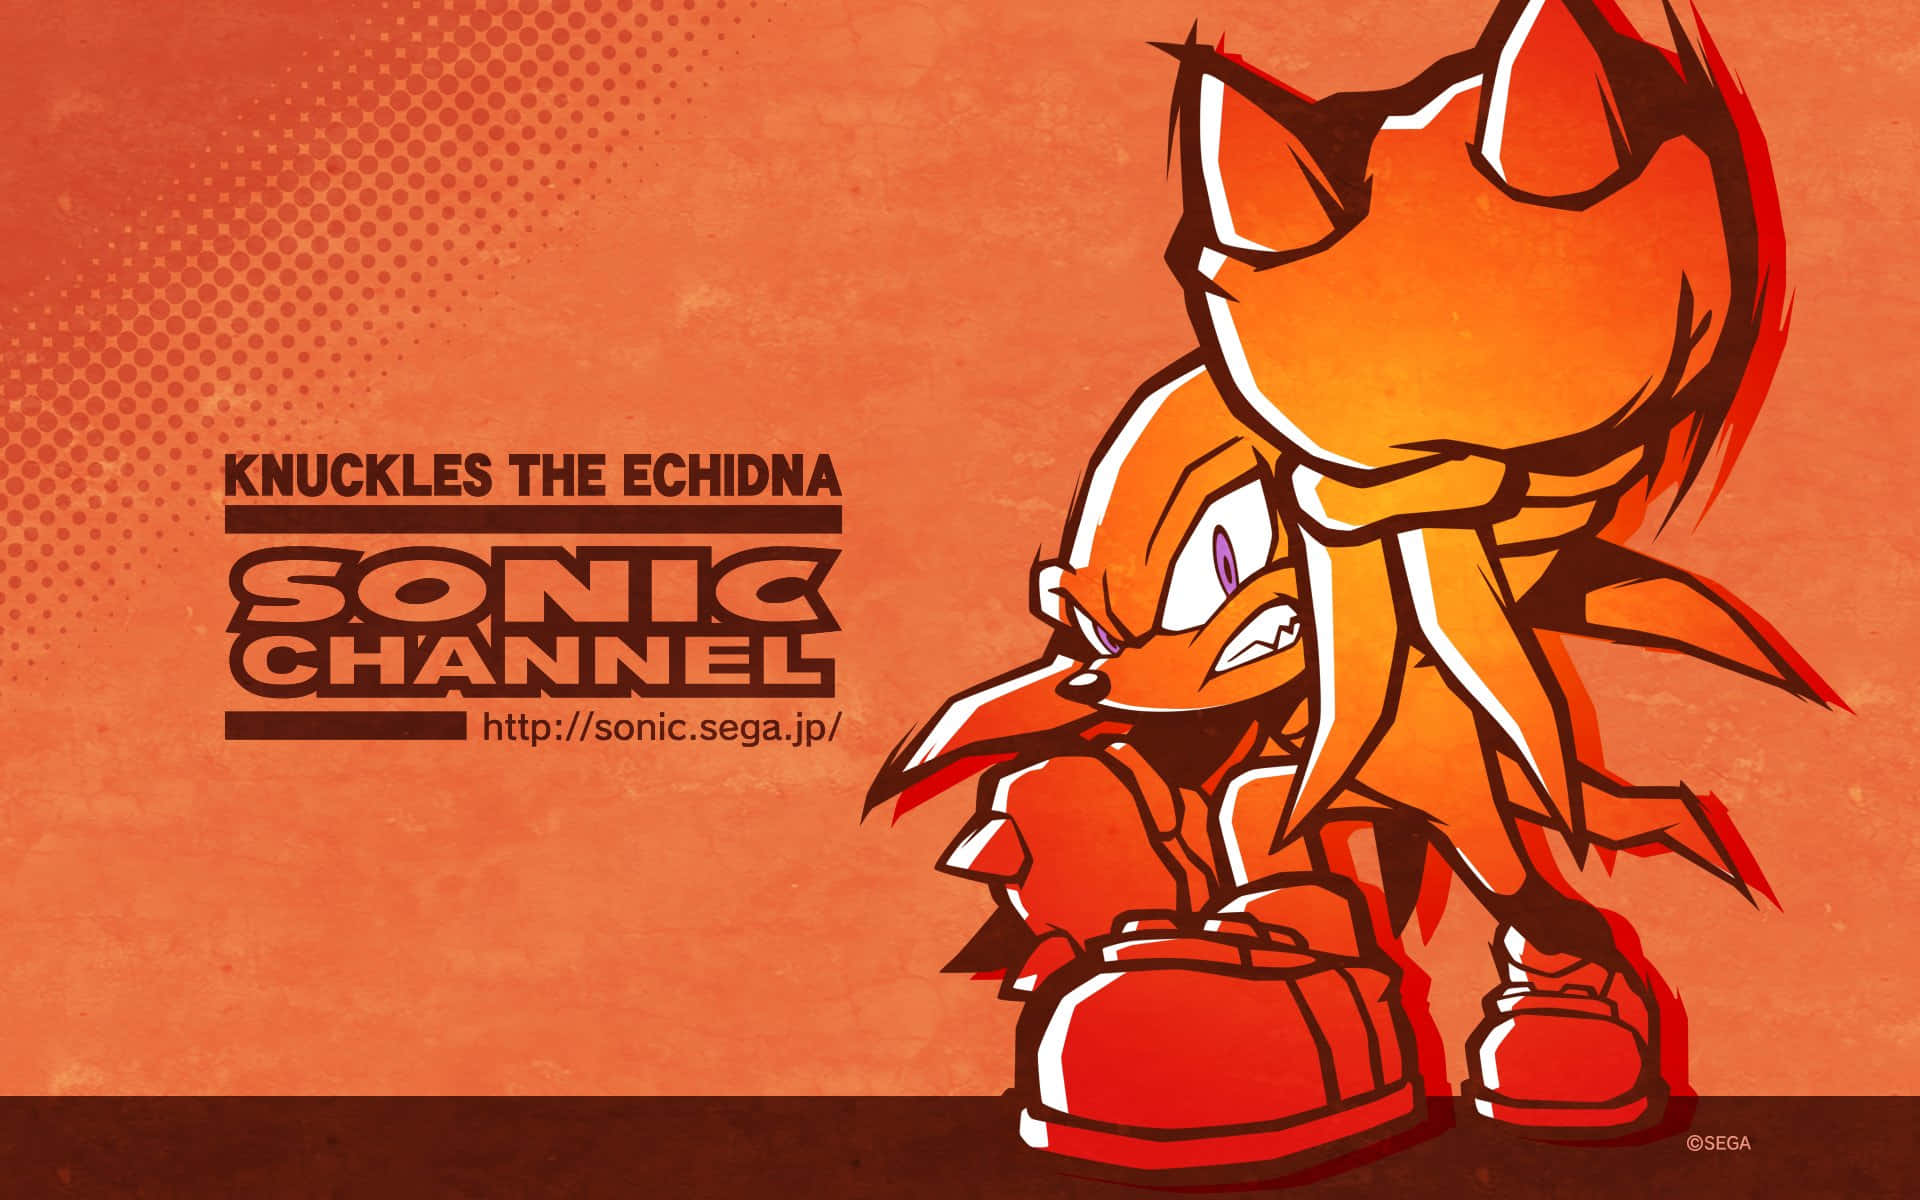 Knucklesechidna Fra Sonic The Hedgehog Wallpaper